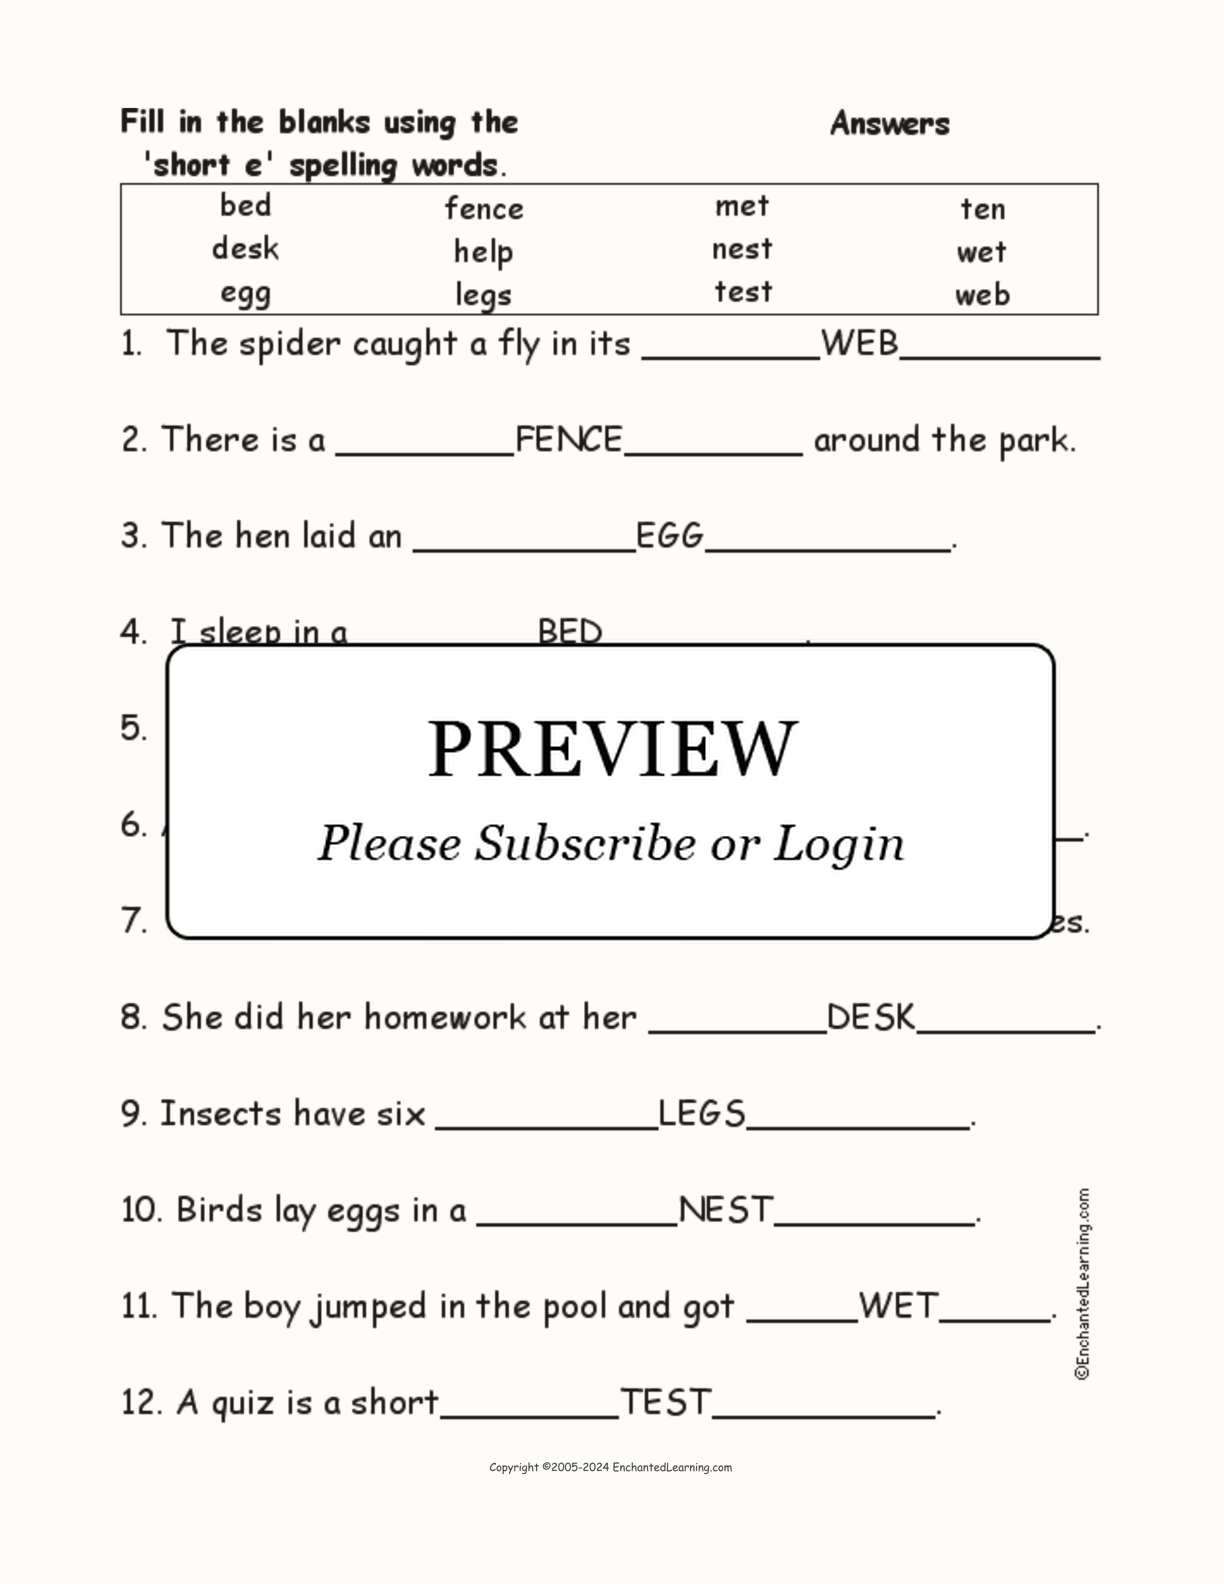 Short E: Spelling Word Questions interactive worksheet page 2